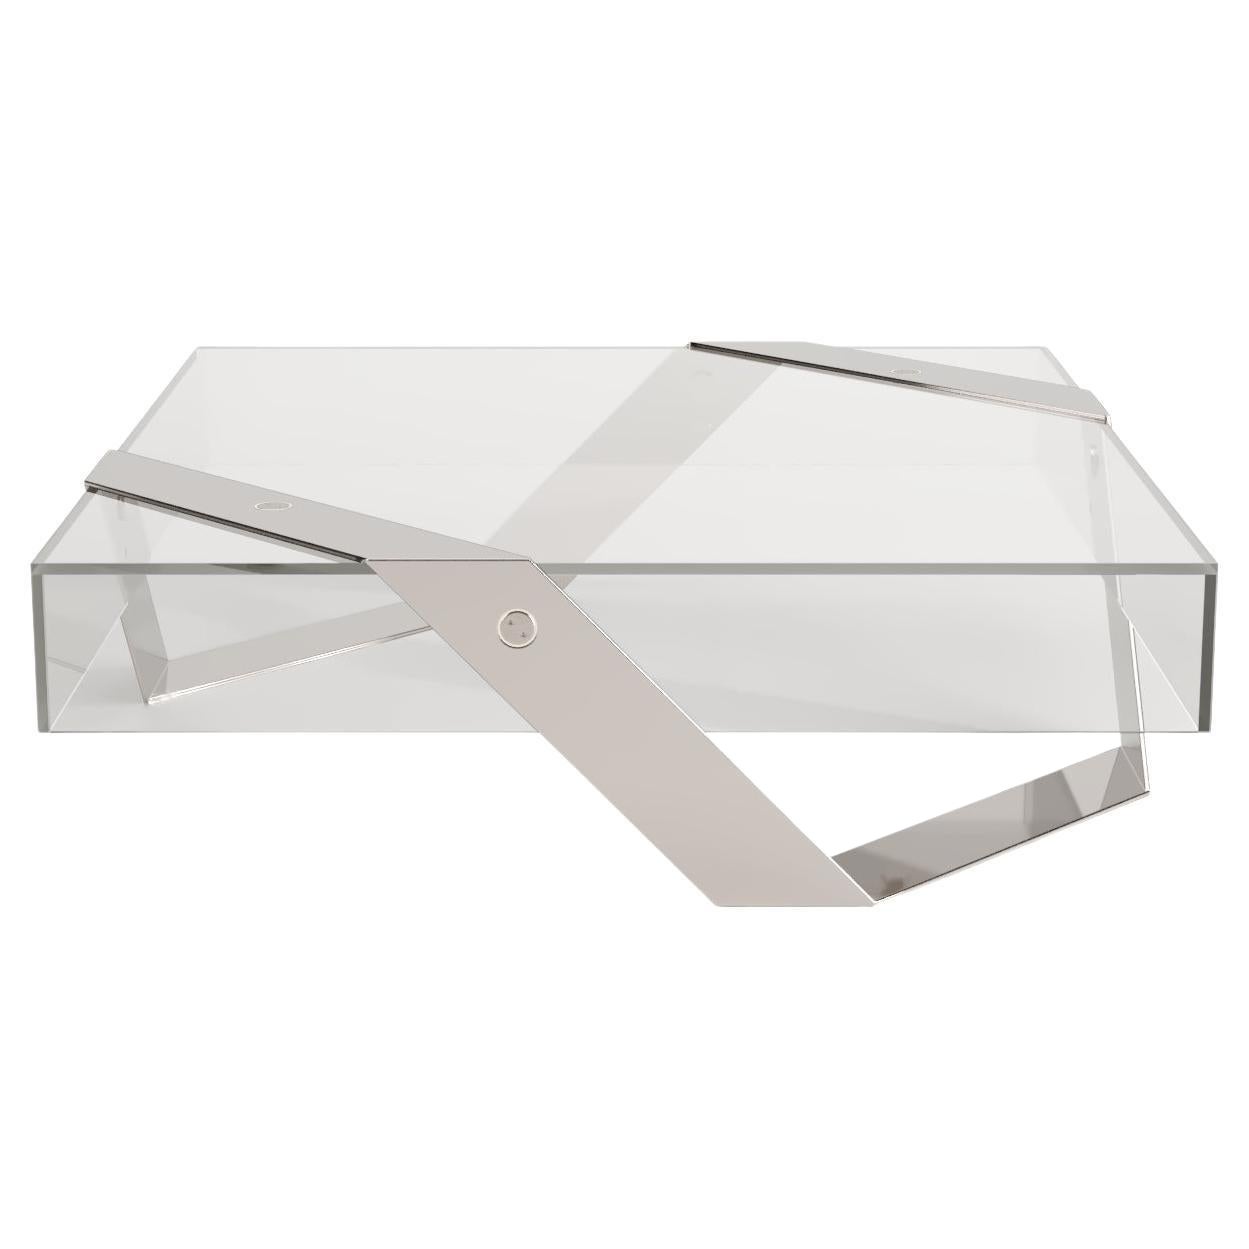 Modern Minimalist Square Center Coffee Table Glass and Polished Stainless Steel For Sale